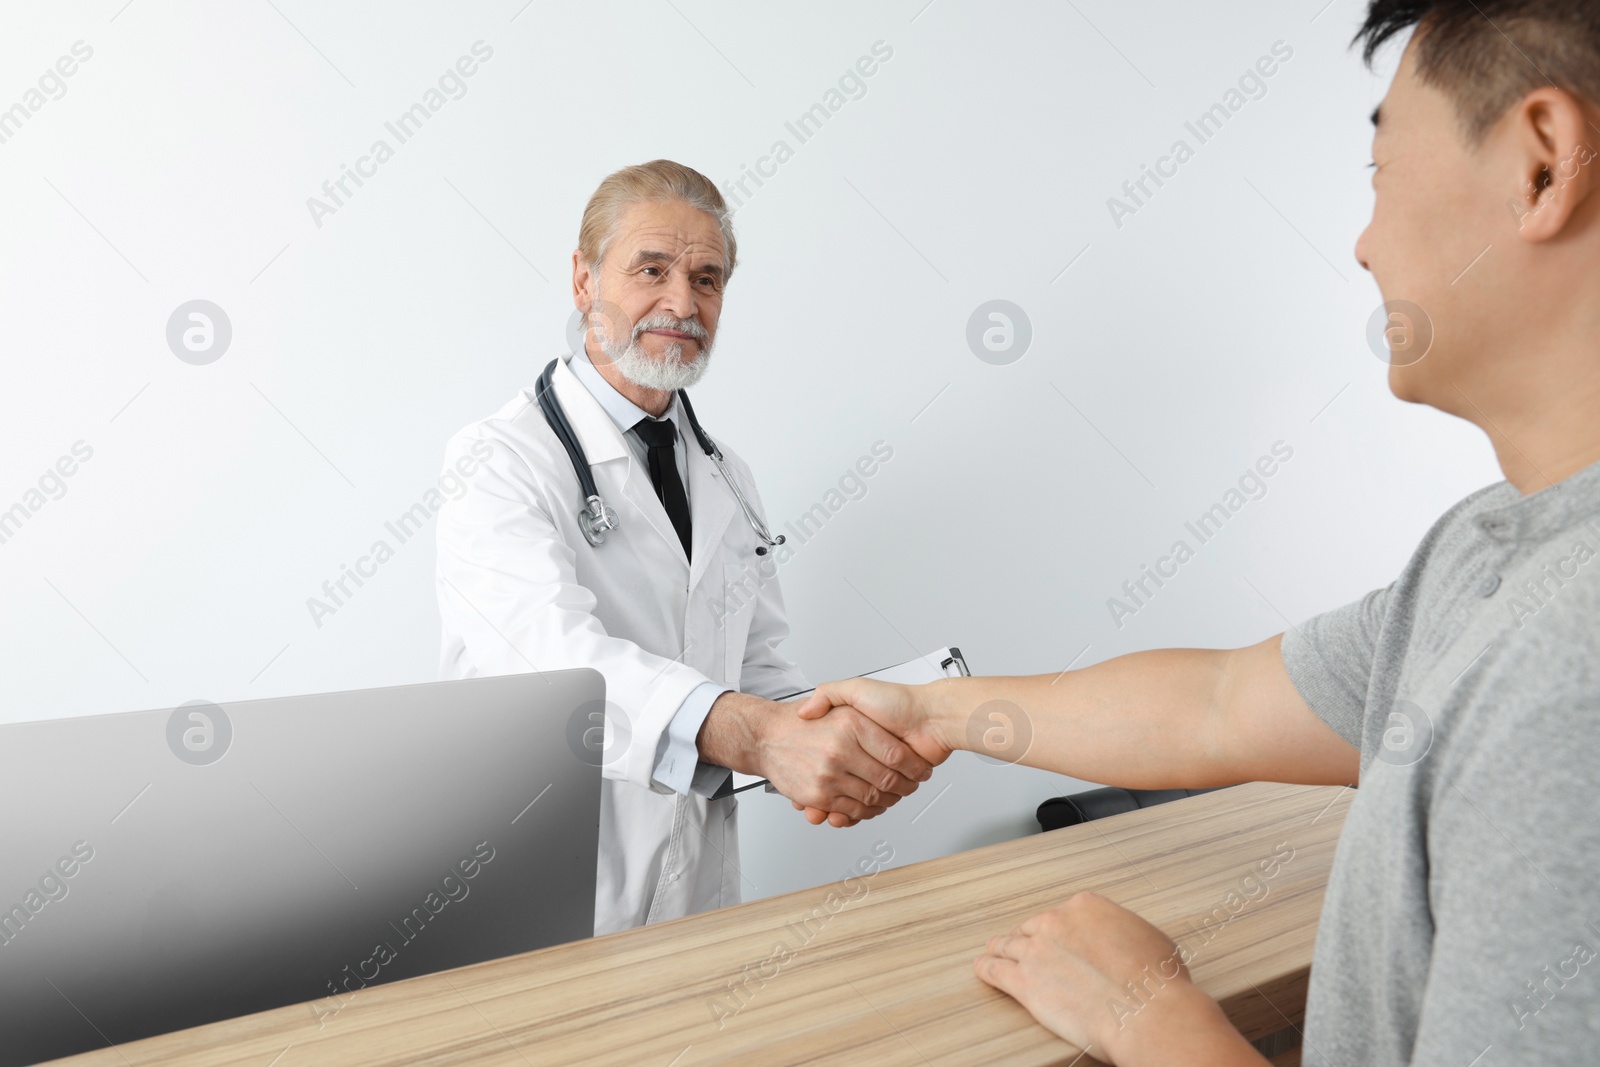 Photo of Doctor shaking hands with patient in hospital